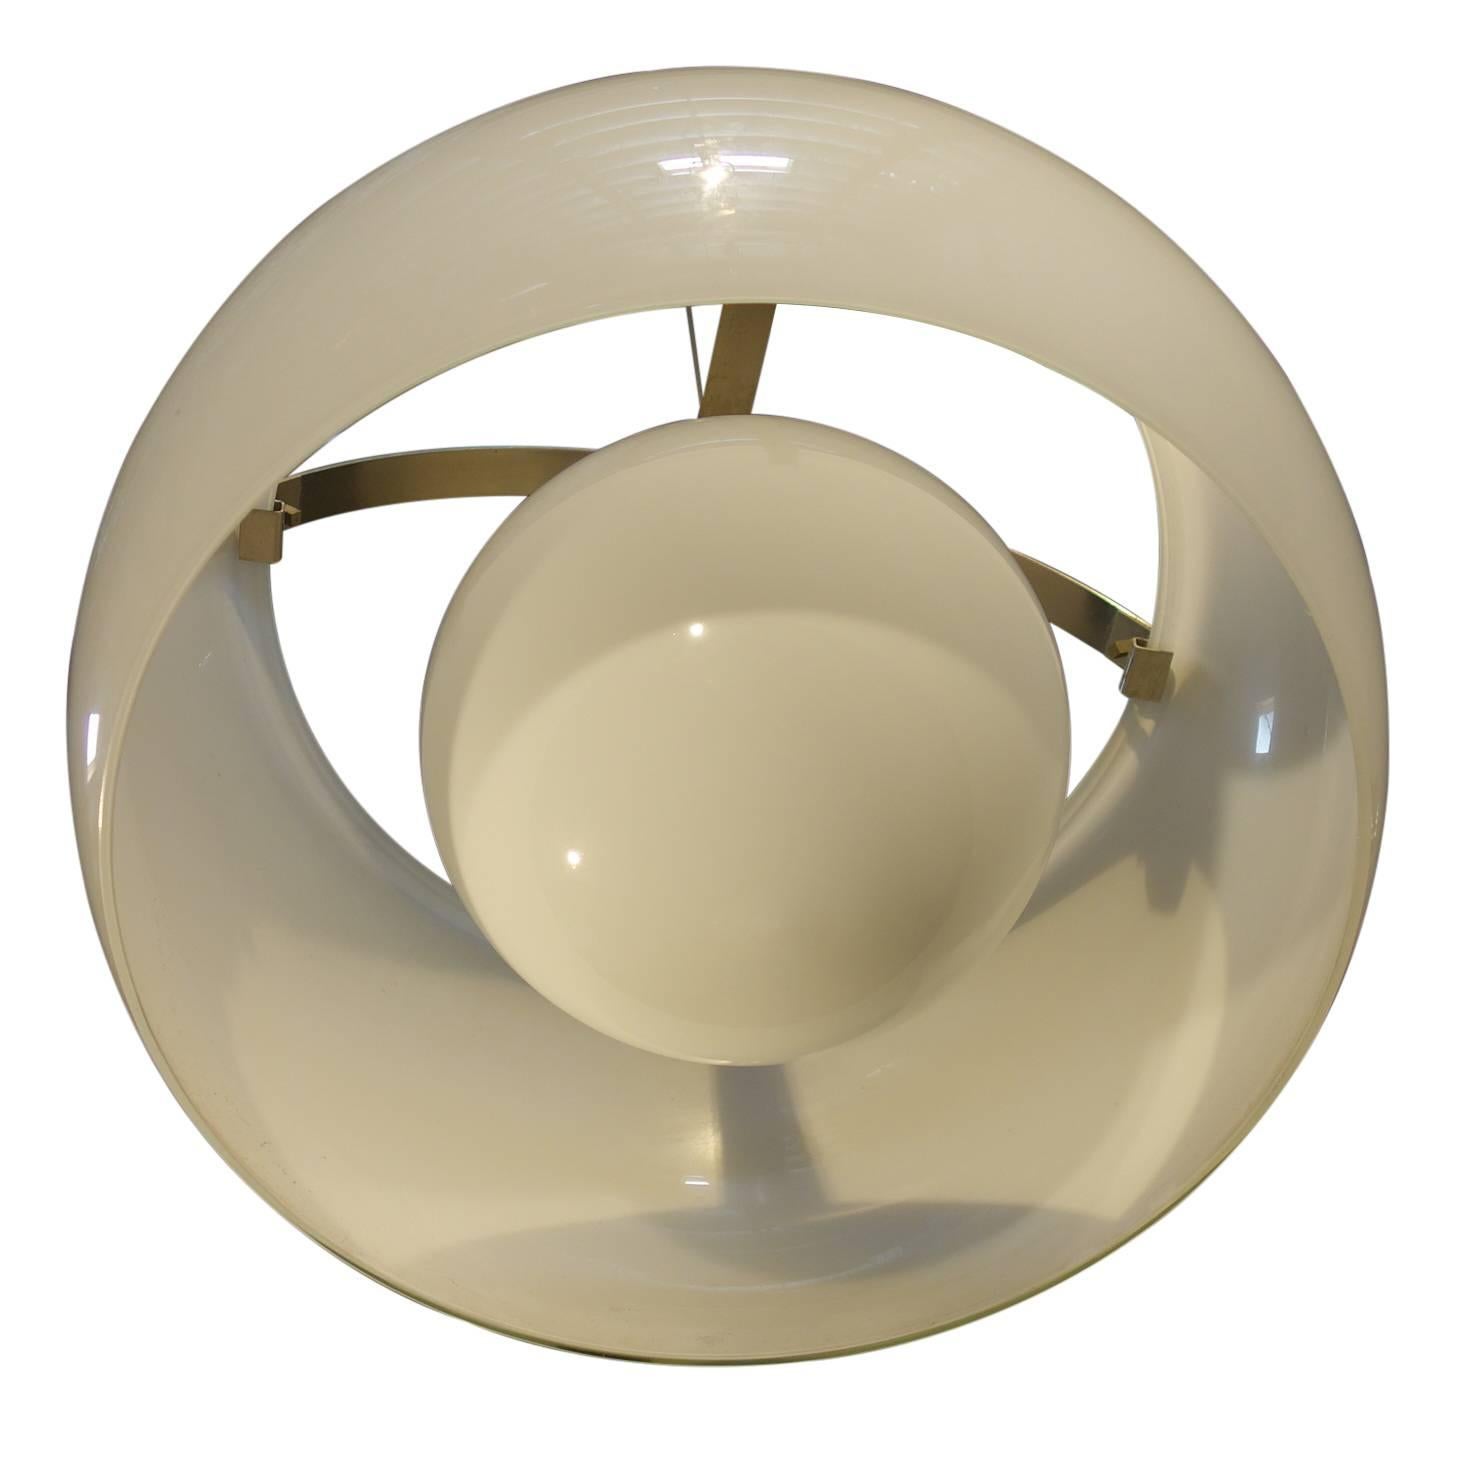 Italian Mid-Century chandelier called Omega, designed by Vico Magistretti and first produced in 1961 in Milan for Artemide. Large white glass shade shield with a smaller round globe suspended inside from burnished chrome banding support fixture.